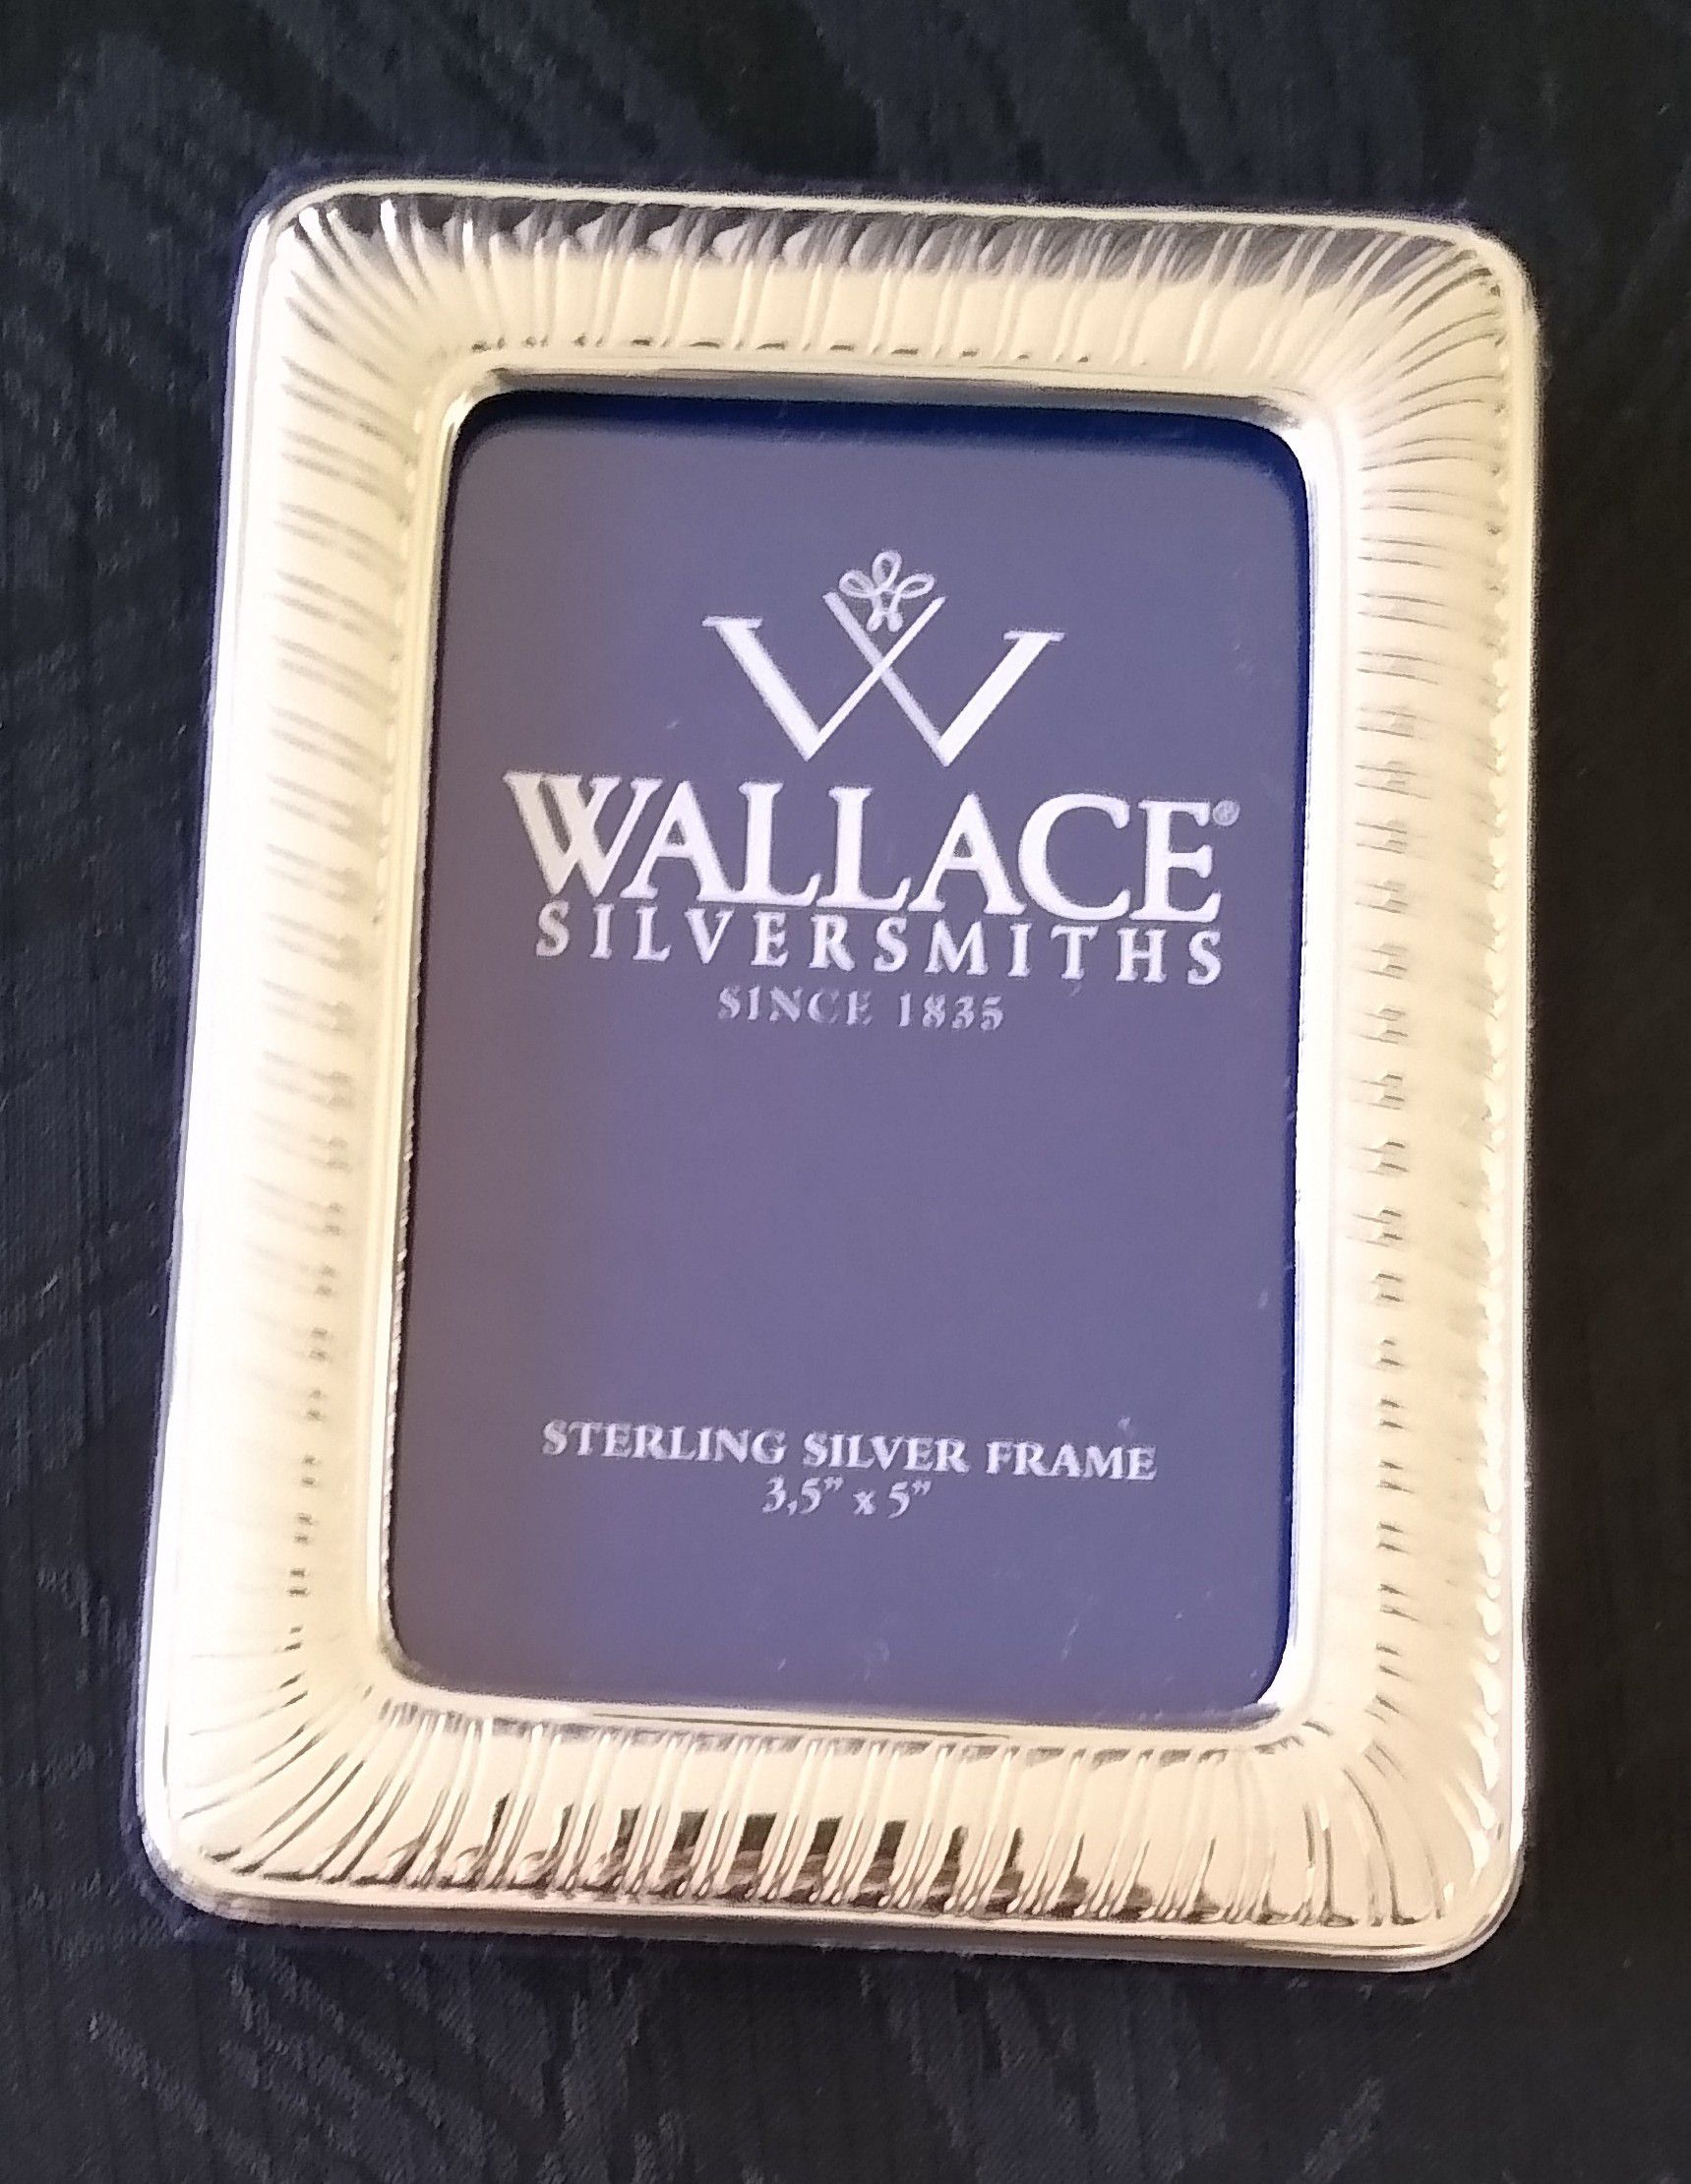 Wallace Silversmiths Sterling Silver Picture Photo Frame.